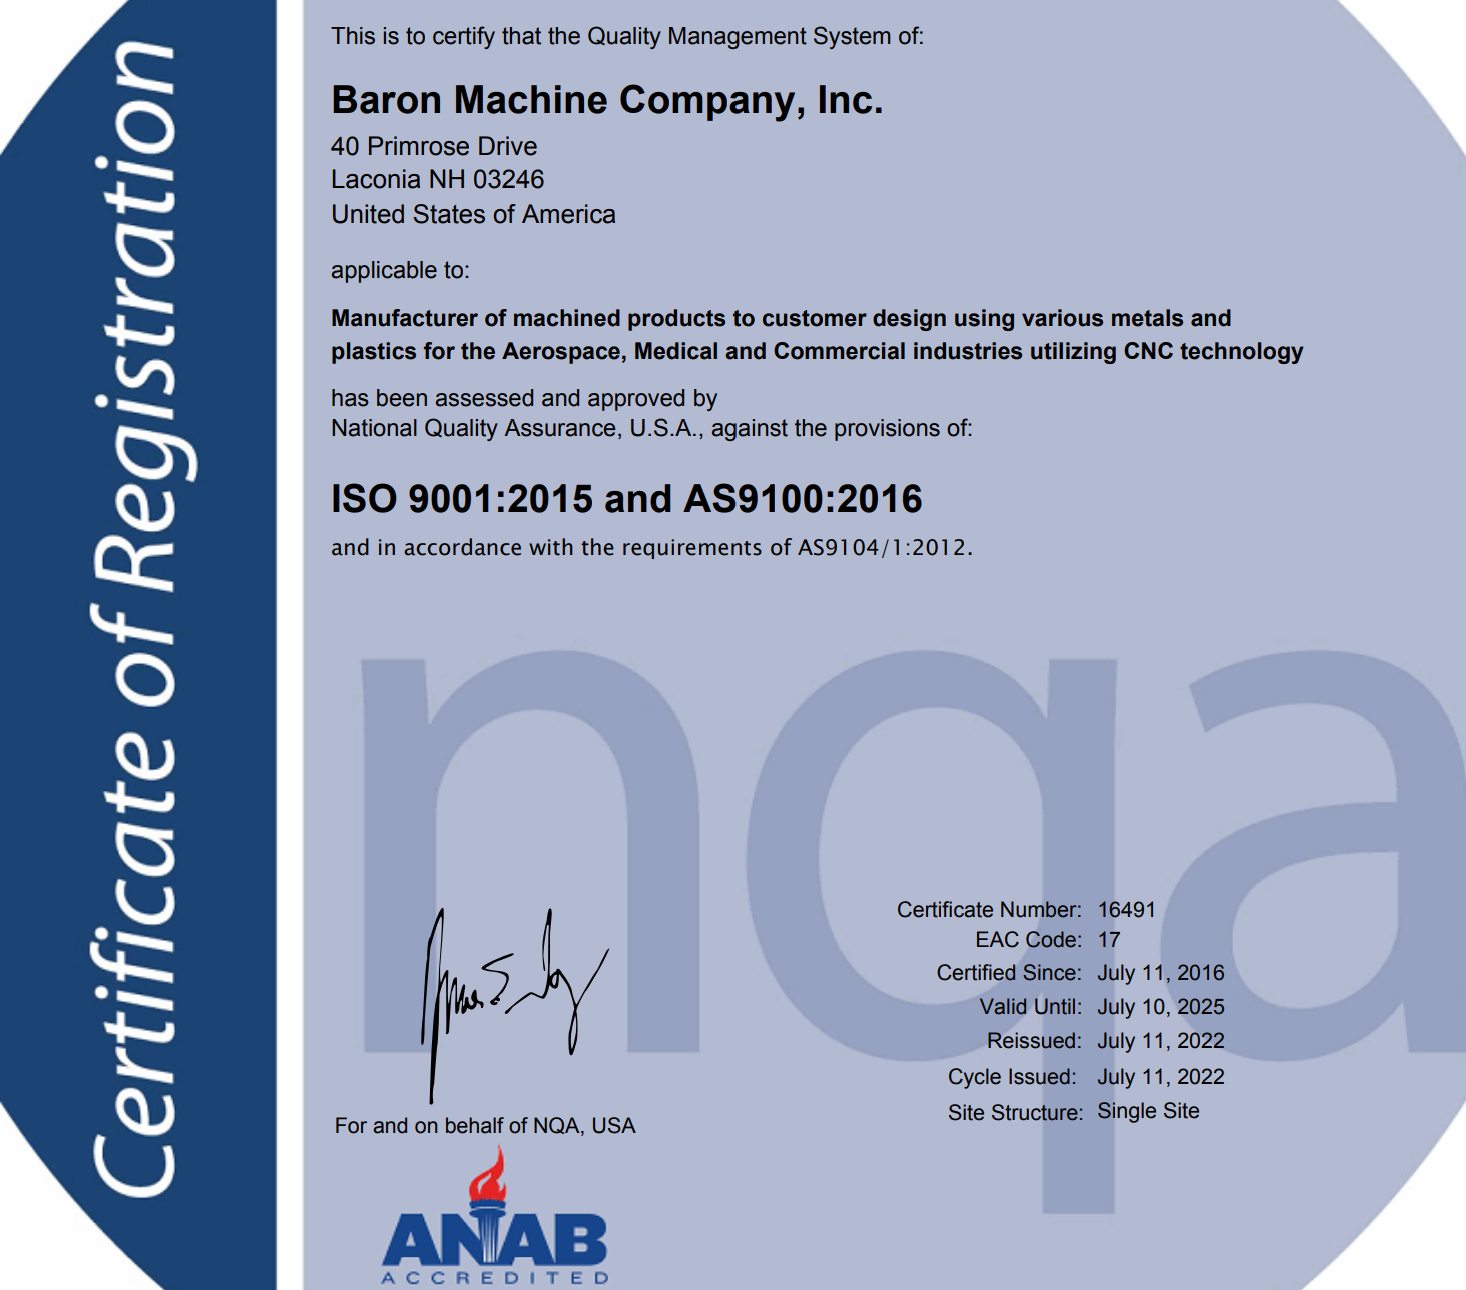 ISO 9001:2015 and AS9100:2016